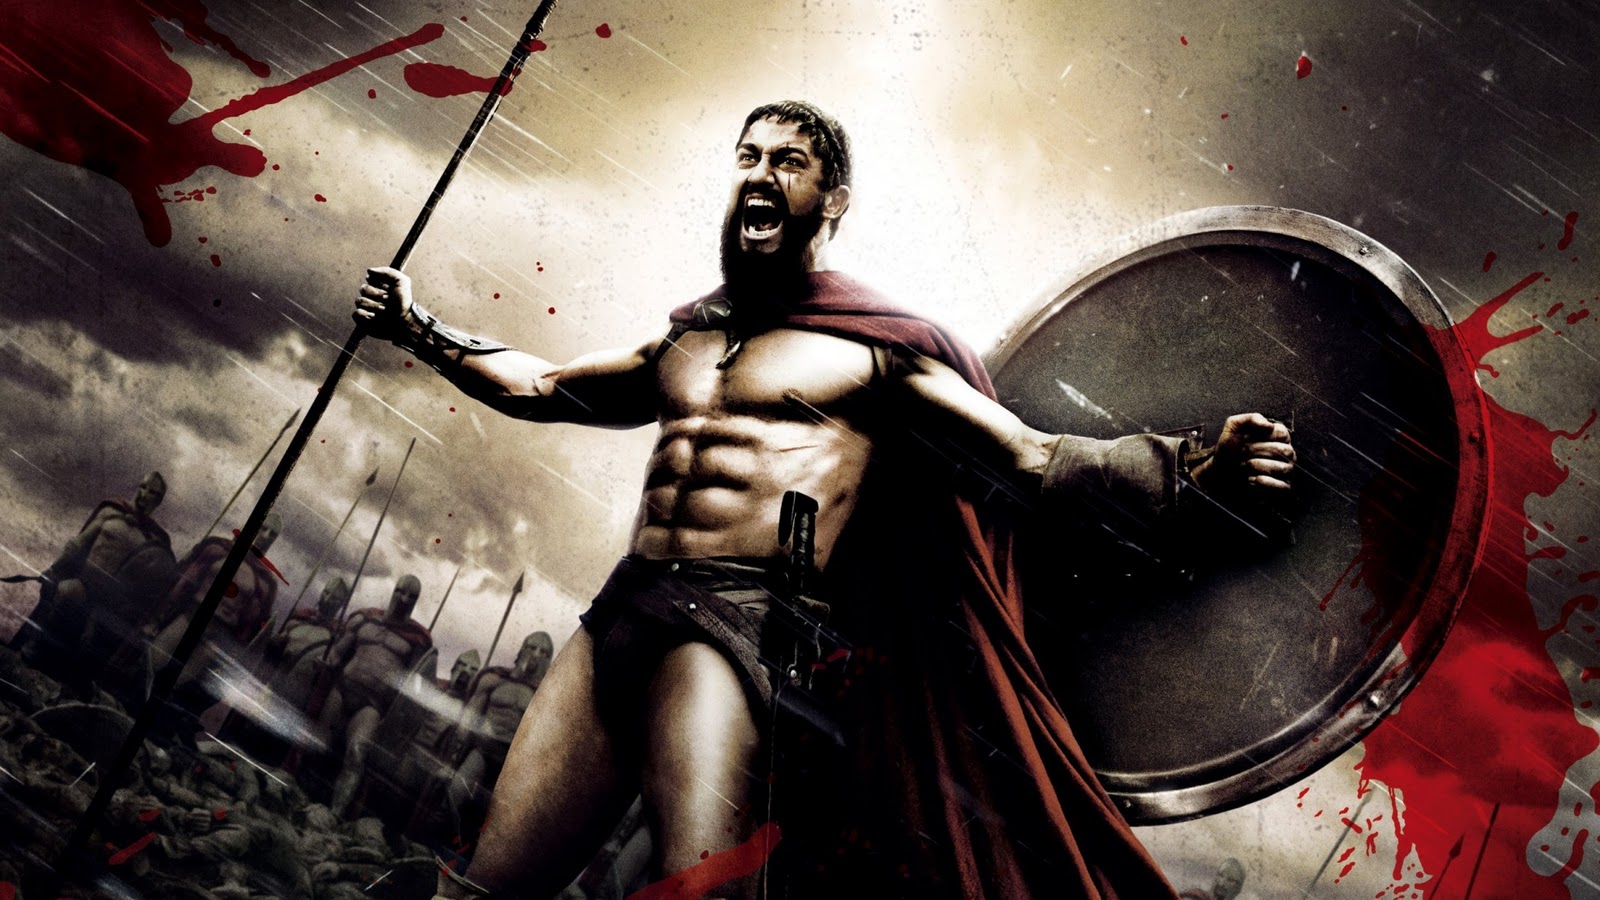 Full Movie 300: Rise of an Empire Online Streaming